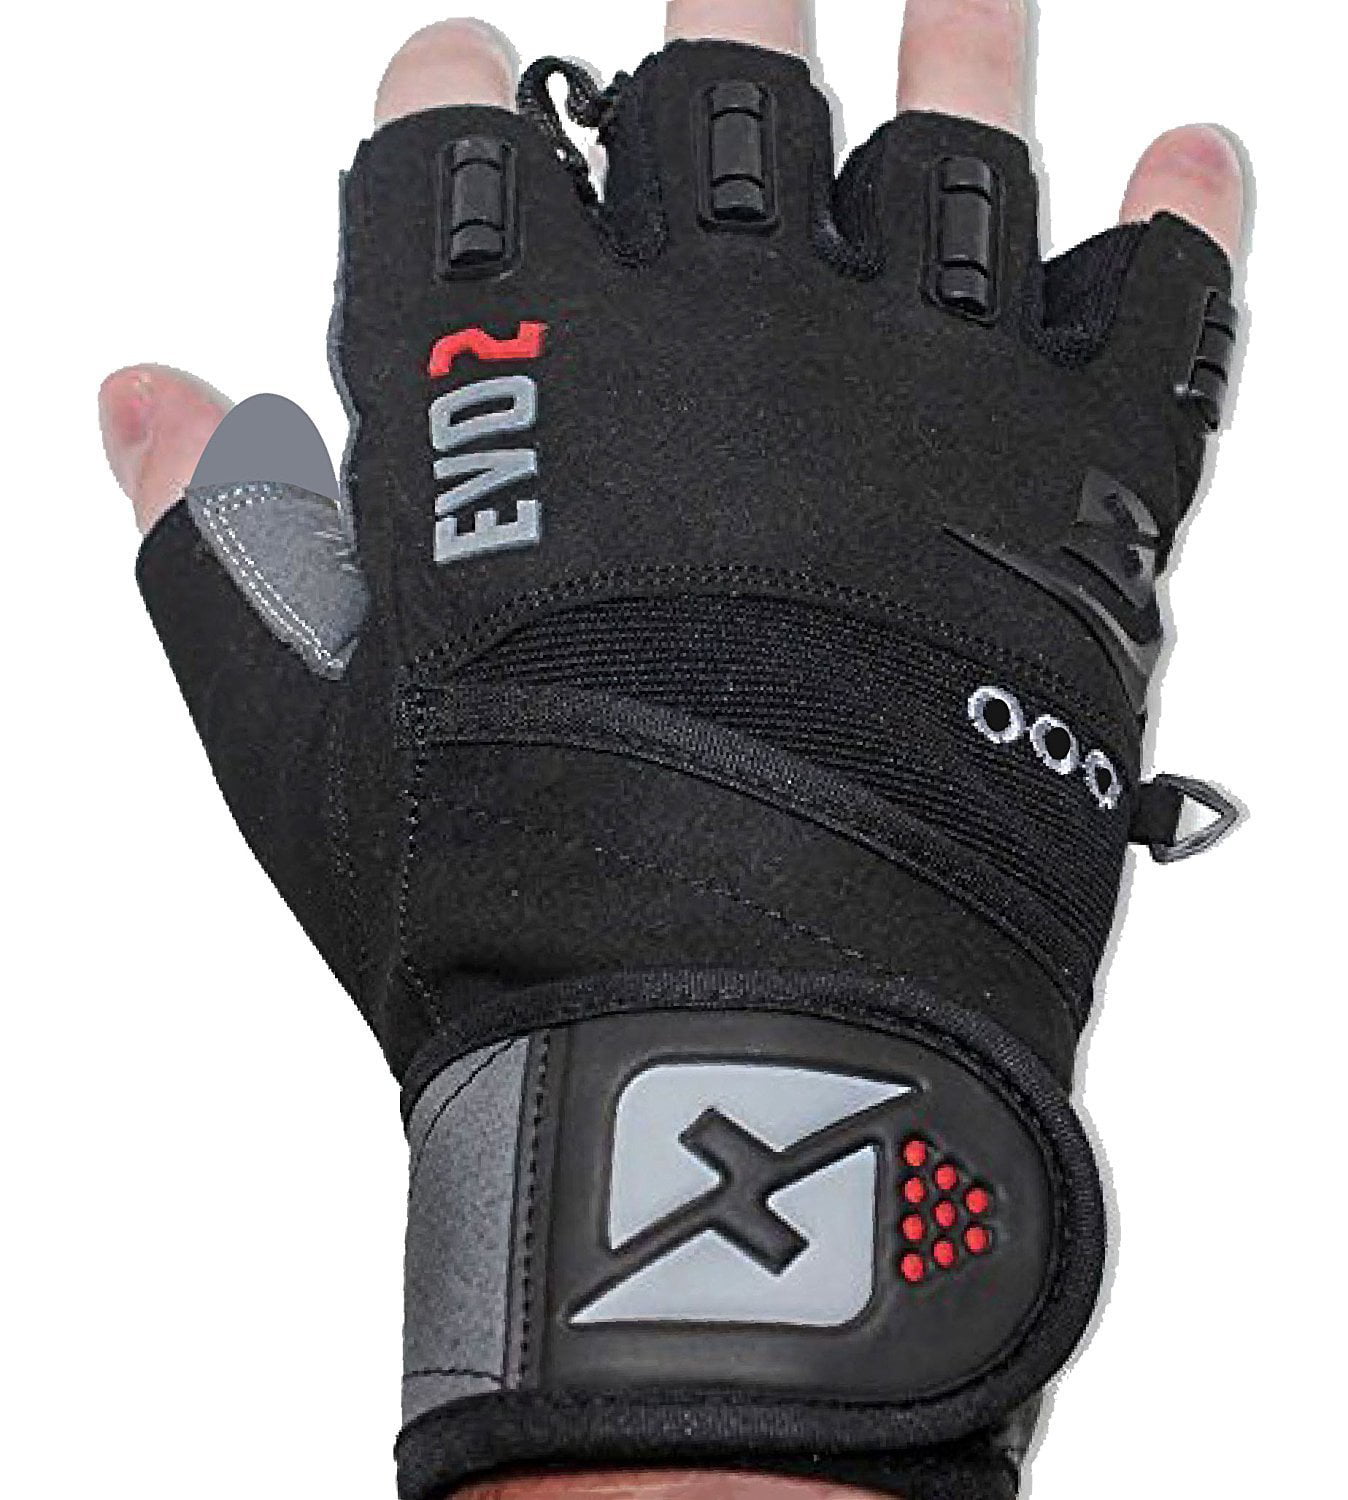 EVO Fitness Gym Gloves Weightlifting Neoprene Wrist Support Straps Wraps Cycling 